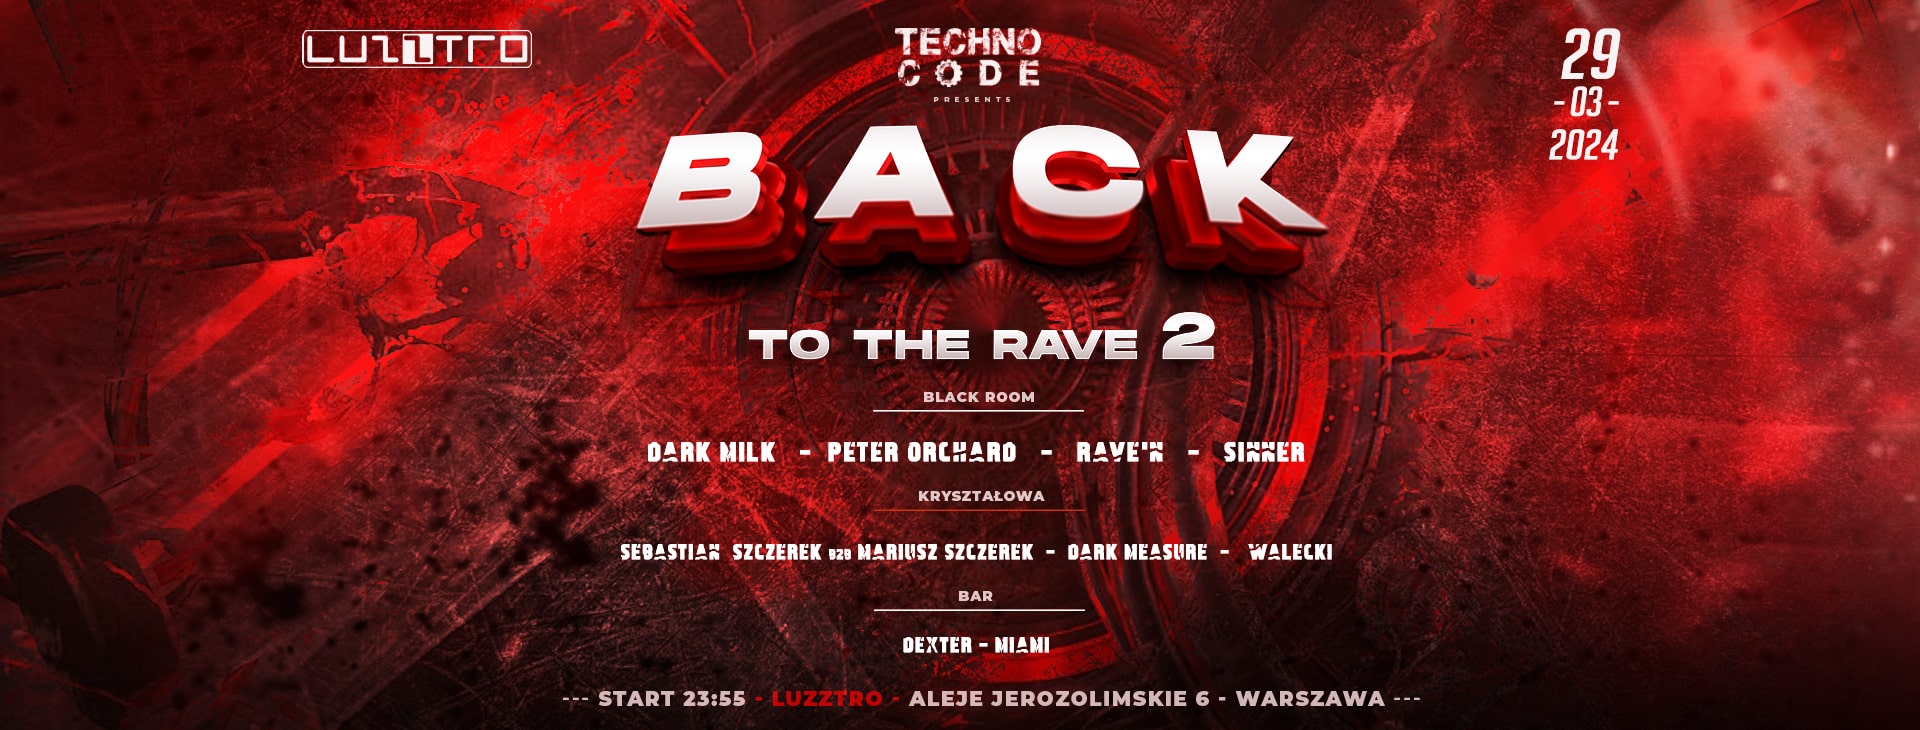 TECHNOCODE: BACK TO THE RAVE 2